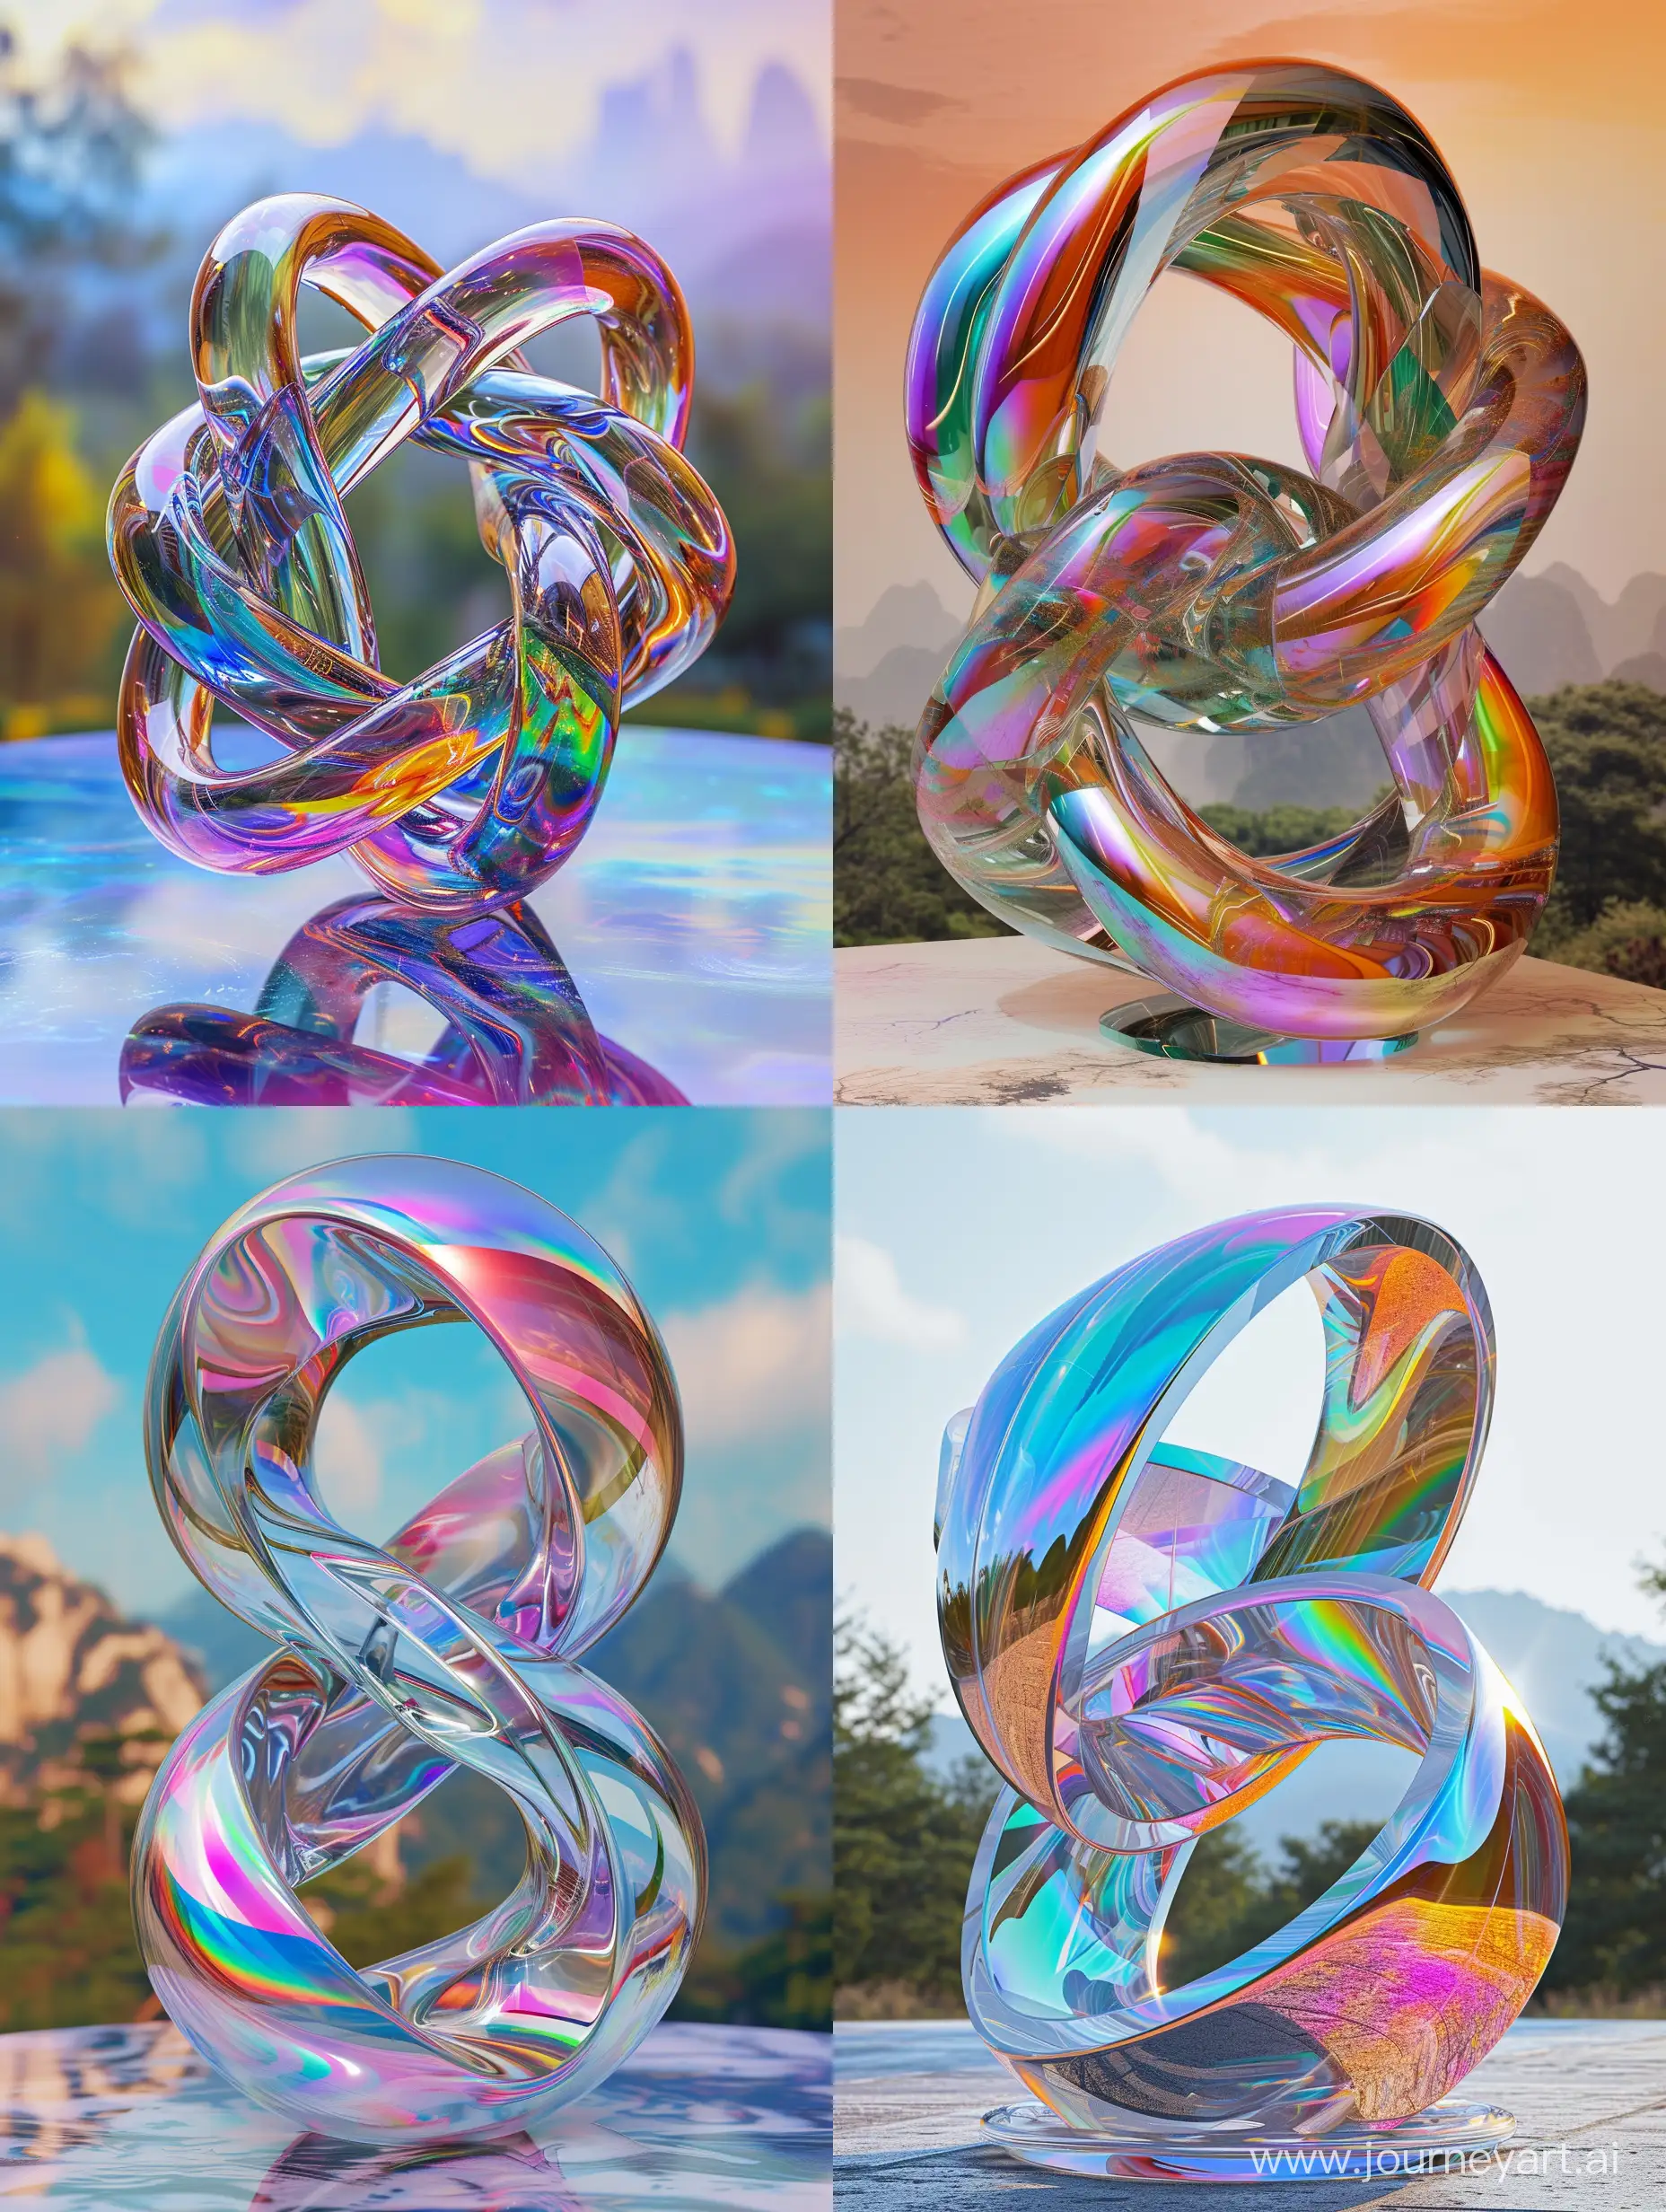 (Highest Quality:1),(Masterpiece:1),(Create a 3D geometric sculpture with iridescent glass textures:0.6),intertwining loops,and vibrant color refractions,zhigan,(Chinese landscape background)